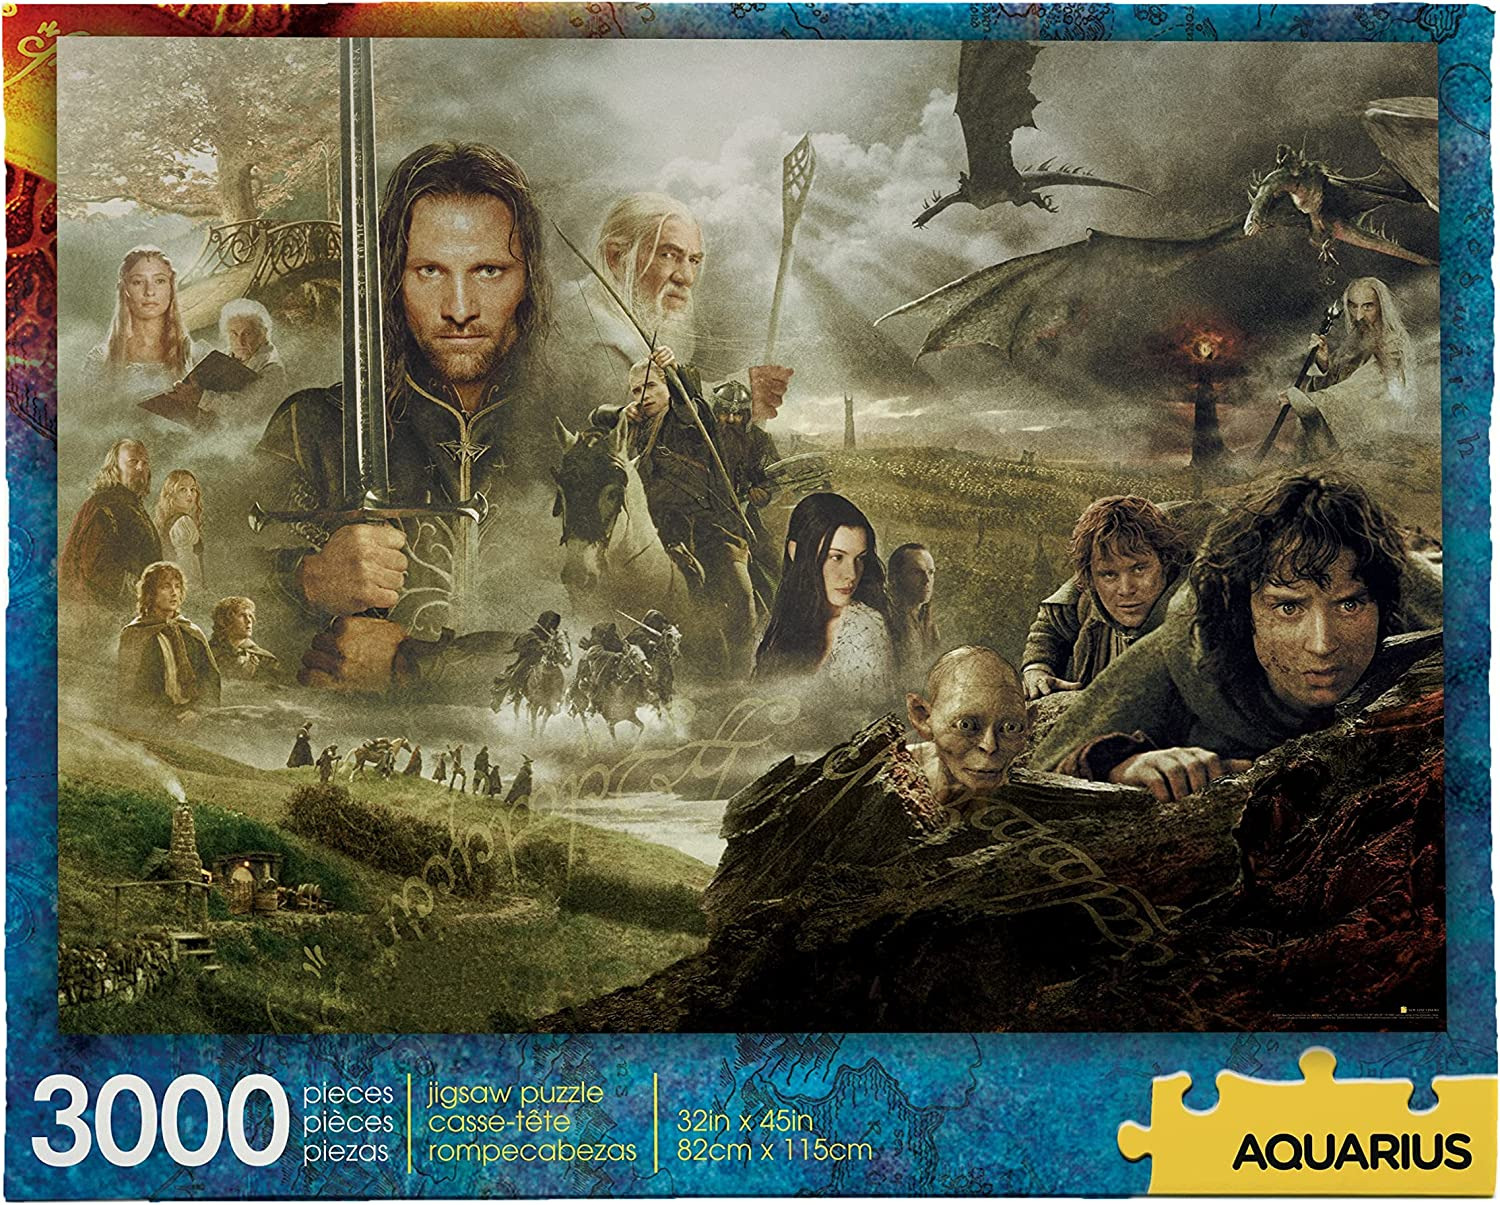 Lord of The Rings (3000 Piece Jigsaw Puzzle) - Officially Licensed Lord of The R